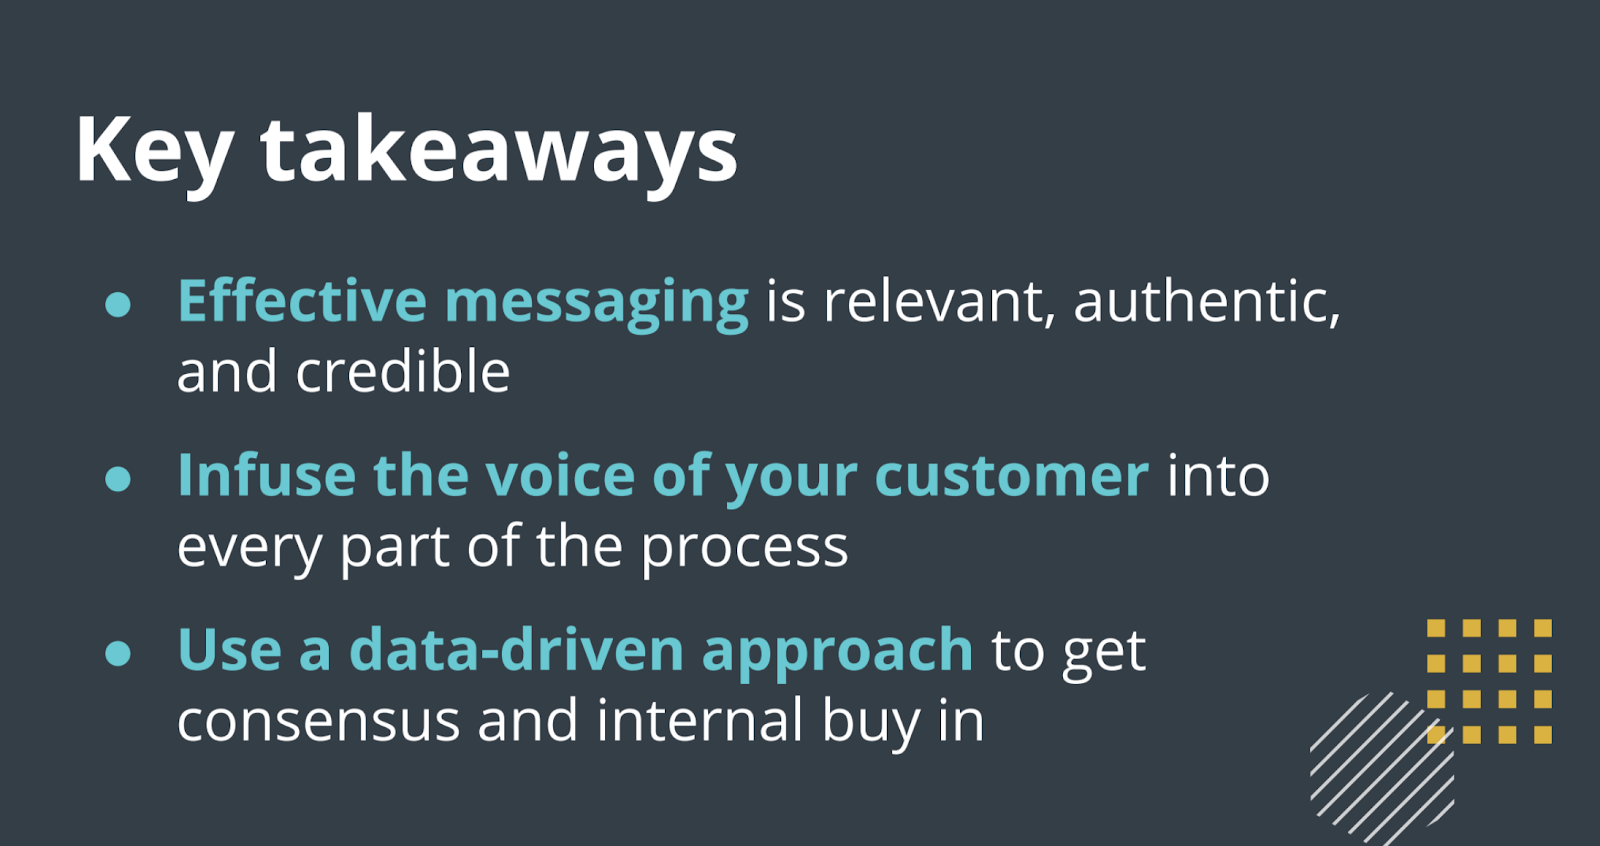 An outline of the key takeaways from Sarah Din's presentation.